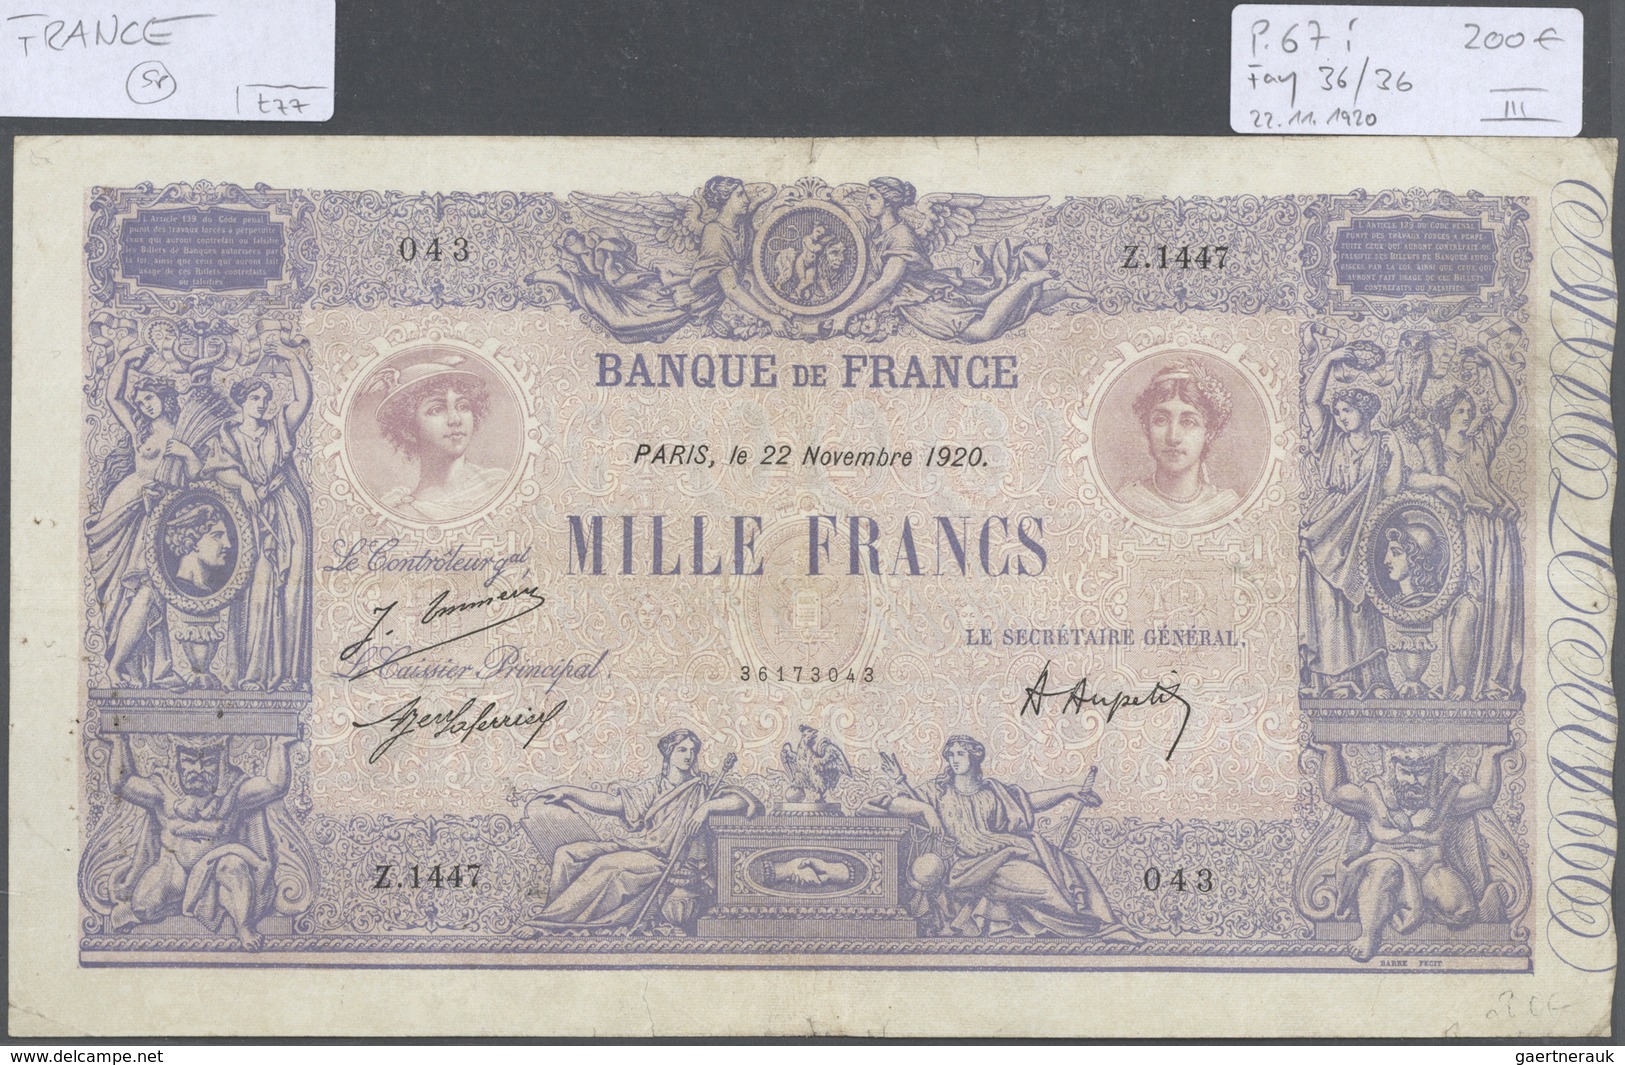 France / Frankreich: set of 12 large size banknotes containing 500 Francs 1920 P. 66h (F), 500 Franc